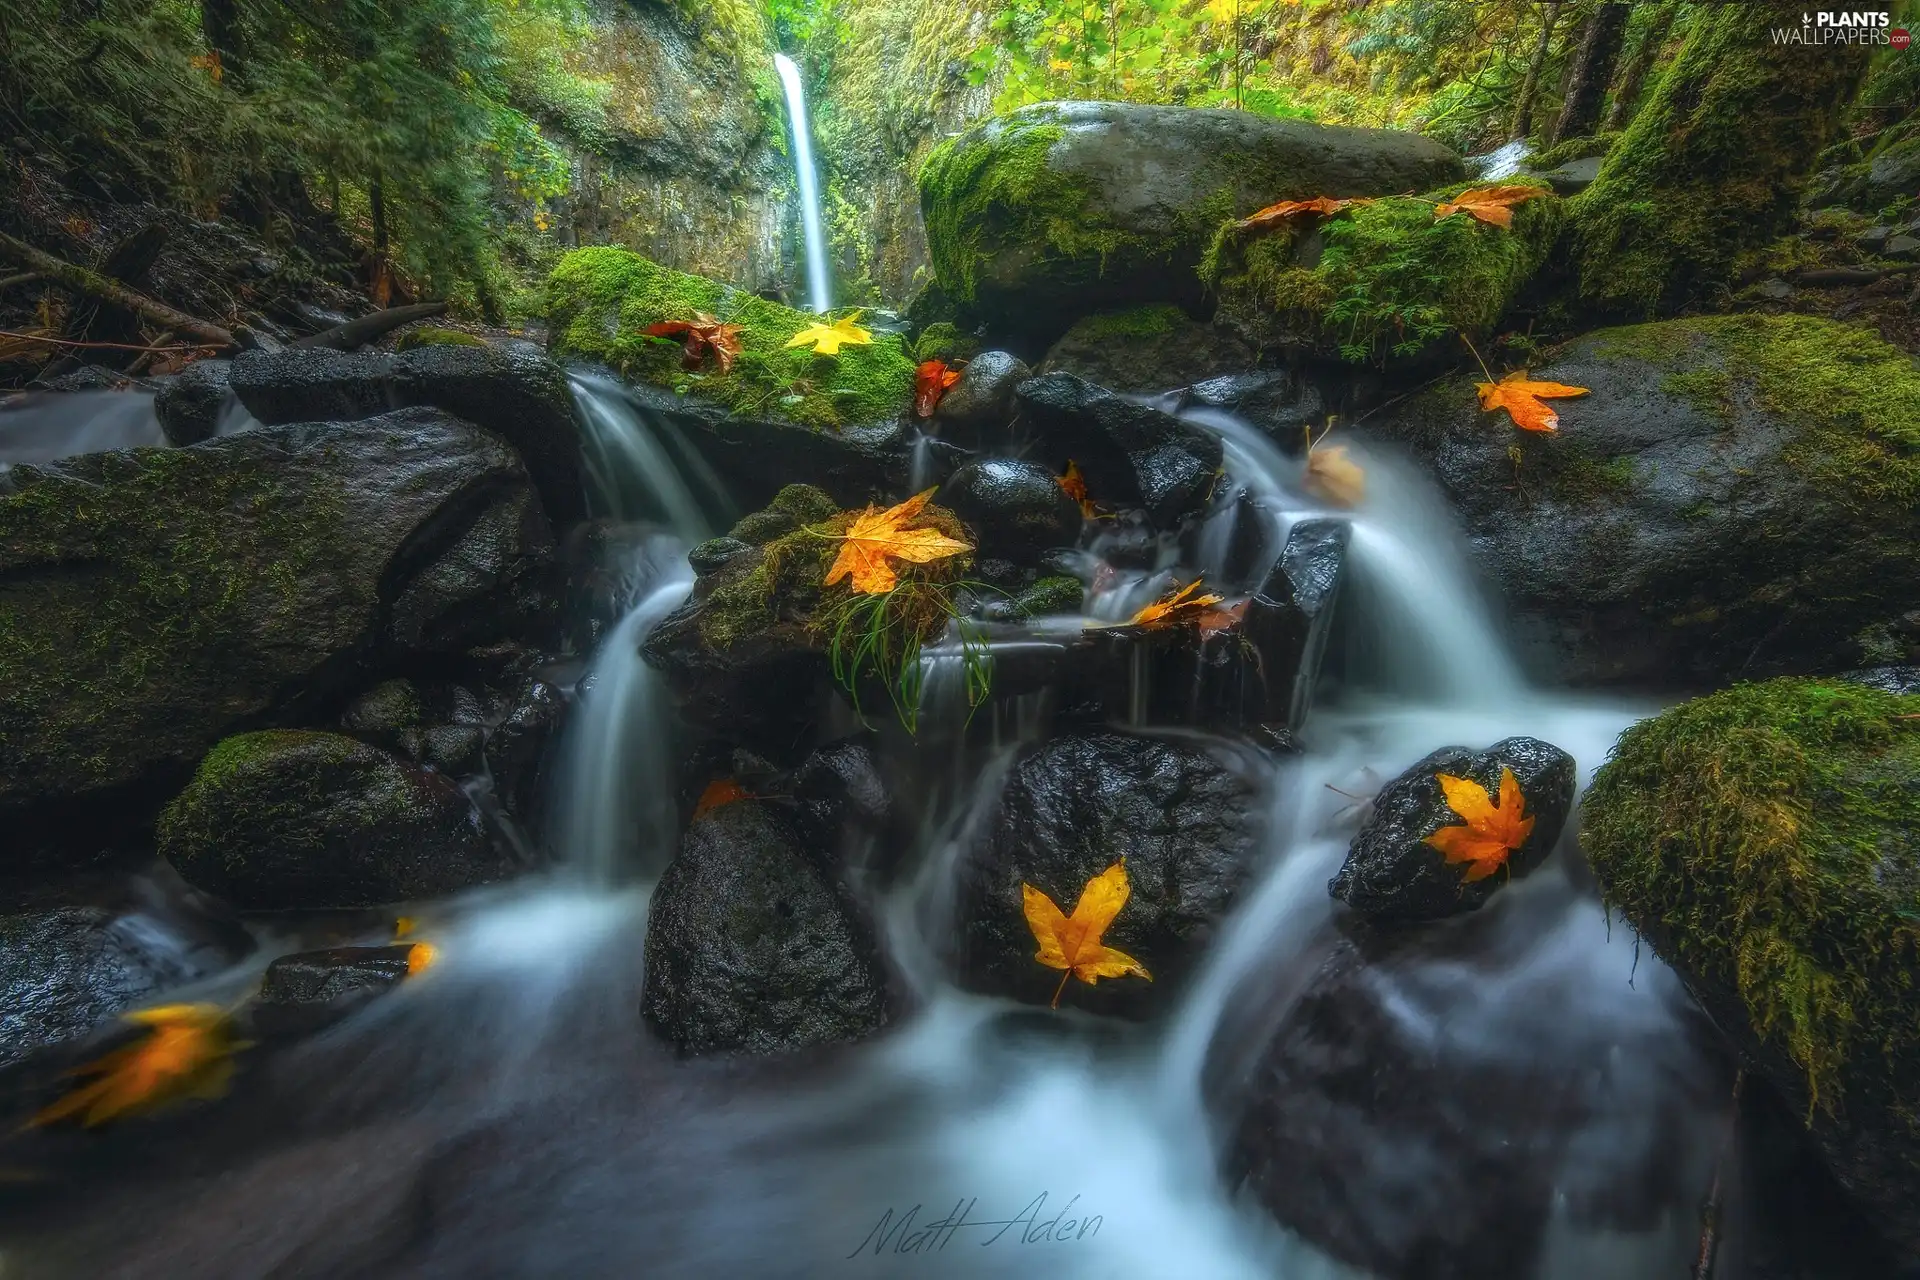 Dry Creek Falls, The United States, autumn, flux, forest, VEGETATION, Moss, Columbia River Gorge Nature Reserve, State of Oregon, Stones, Leaf